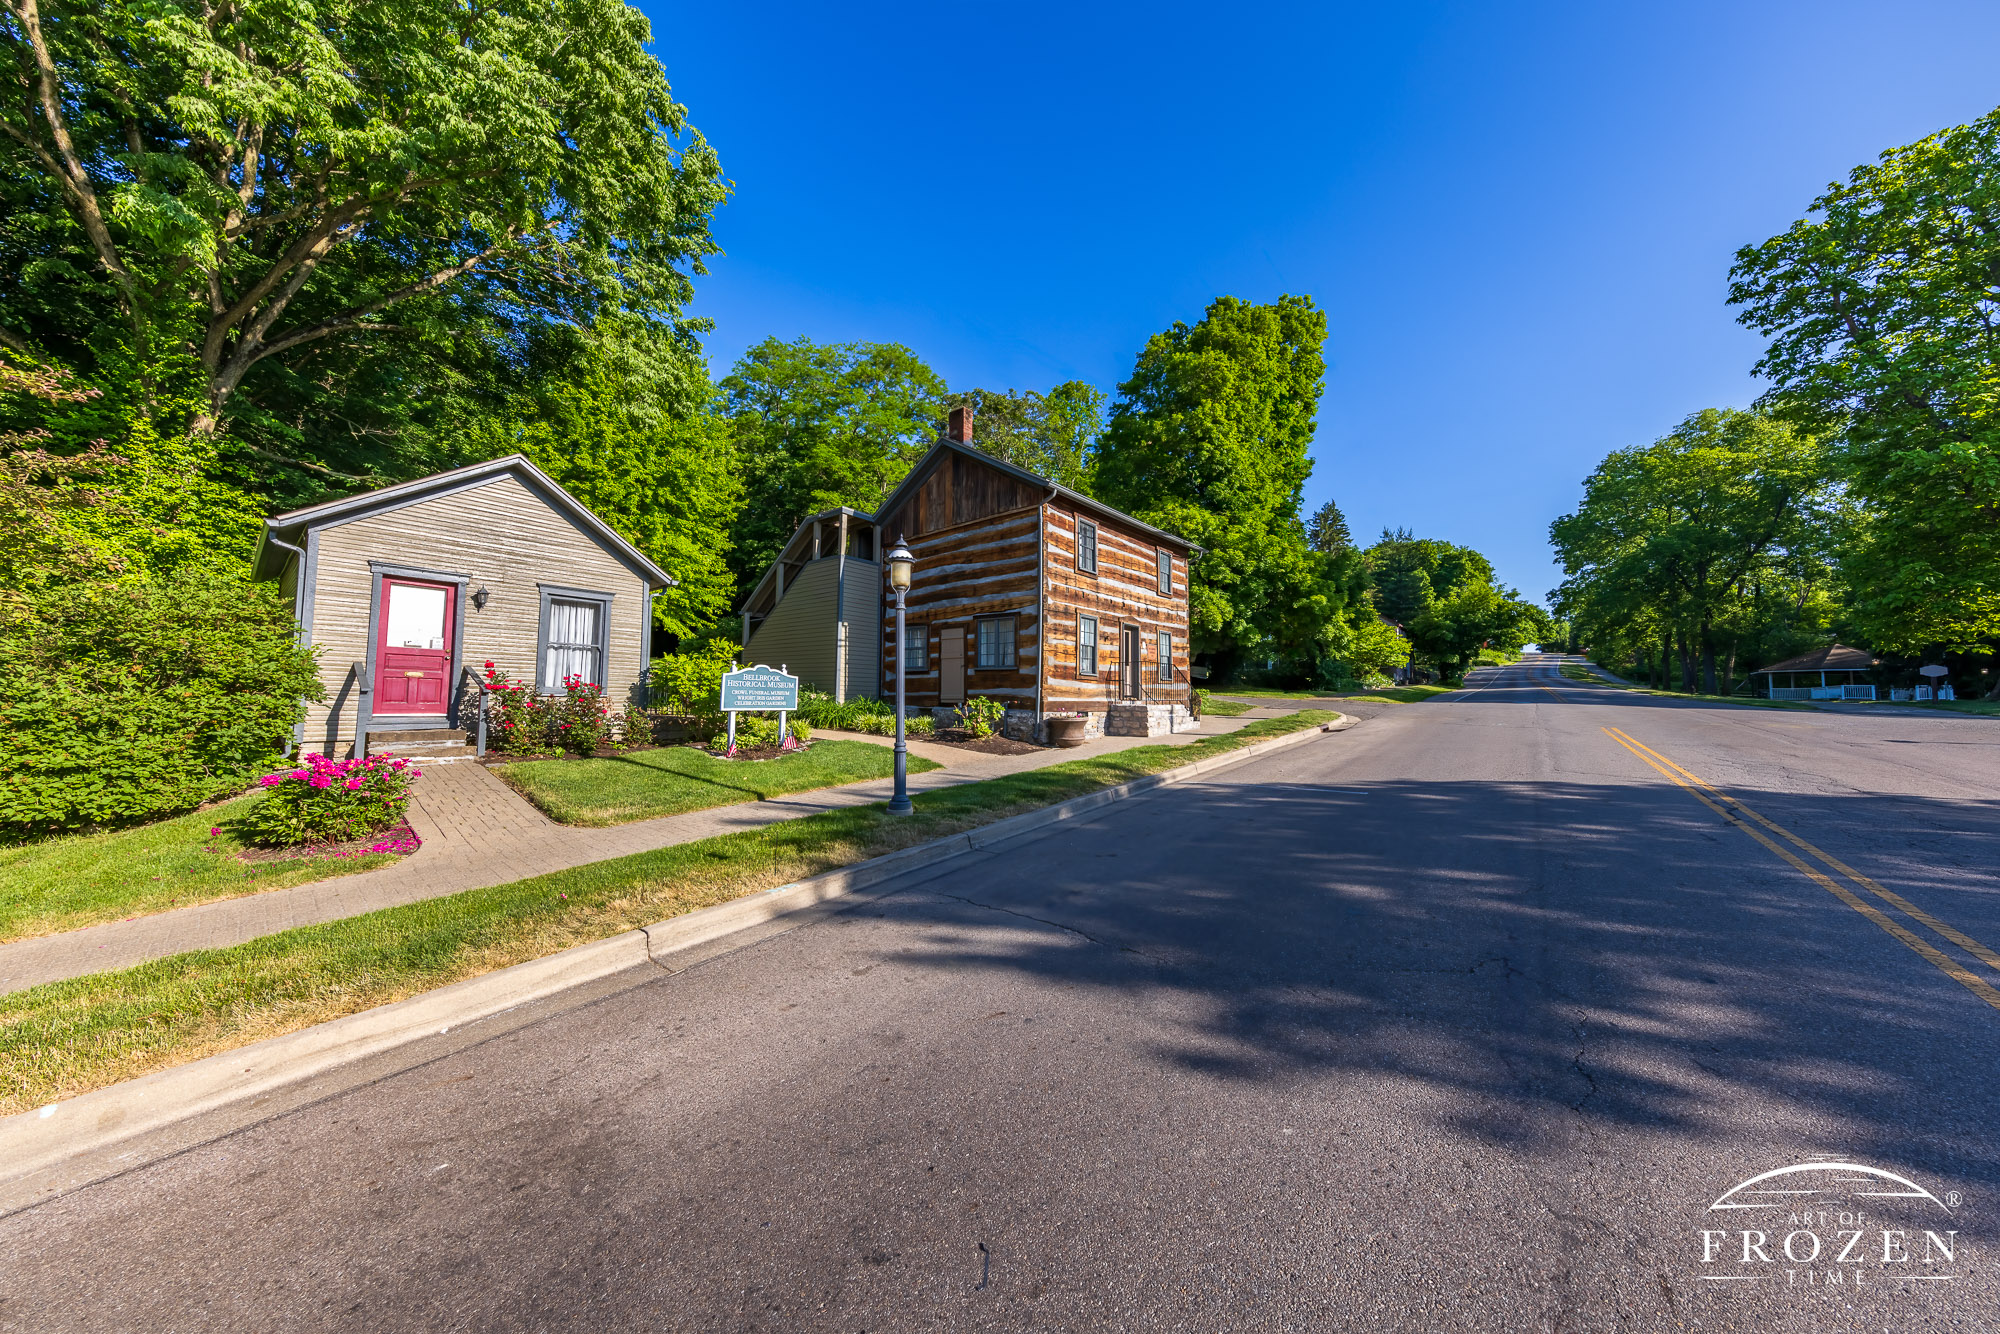 A Greene County historical structure where a refurbished log home stands in Bellbrook, Ohio under blue skies and at the bottom of Main Street which descends into the village